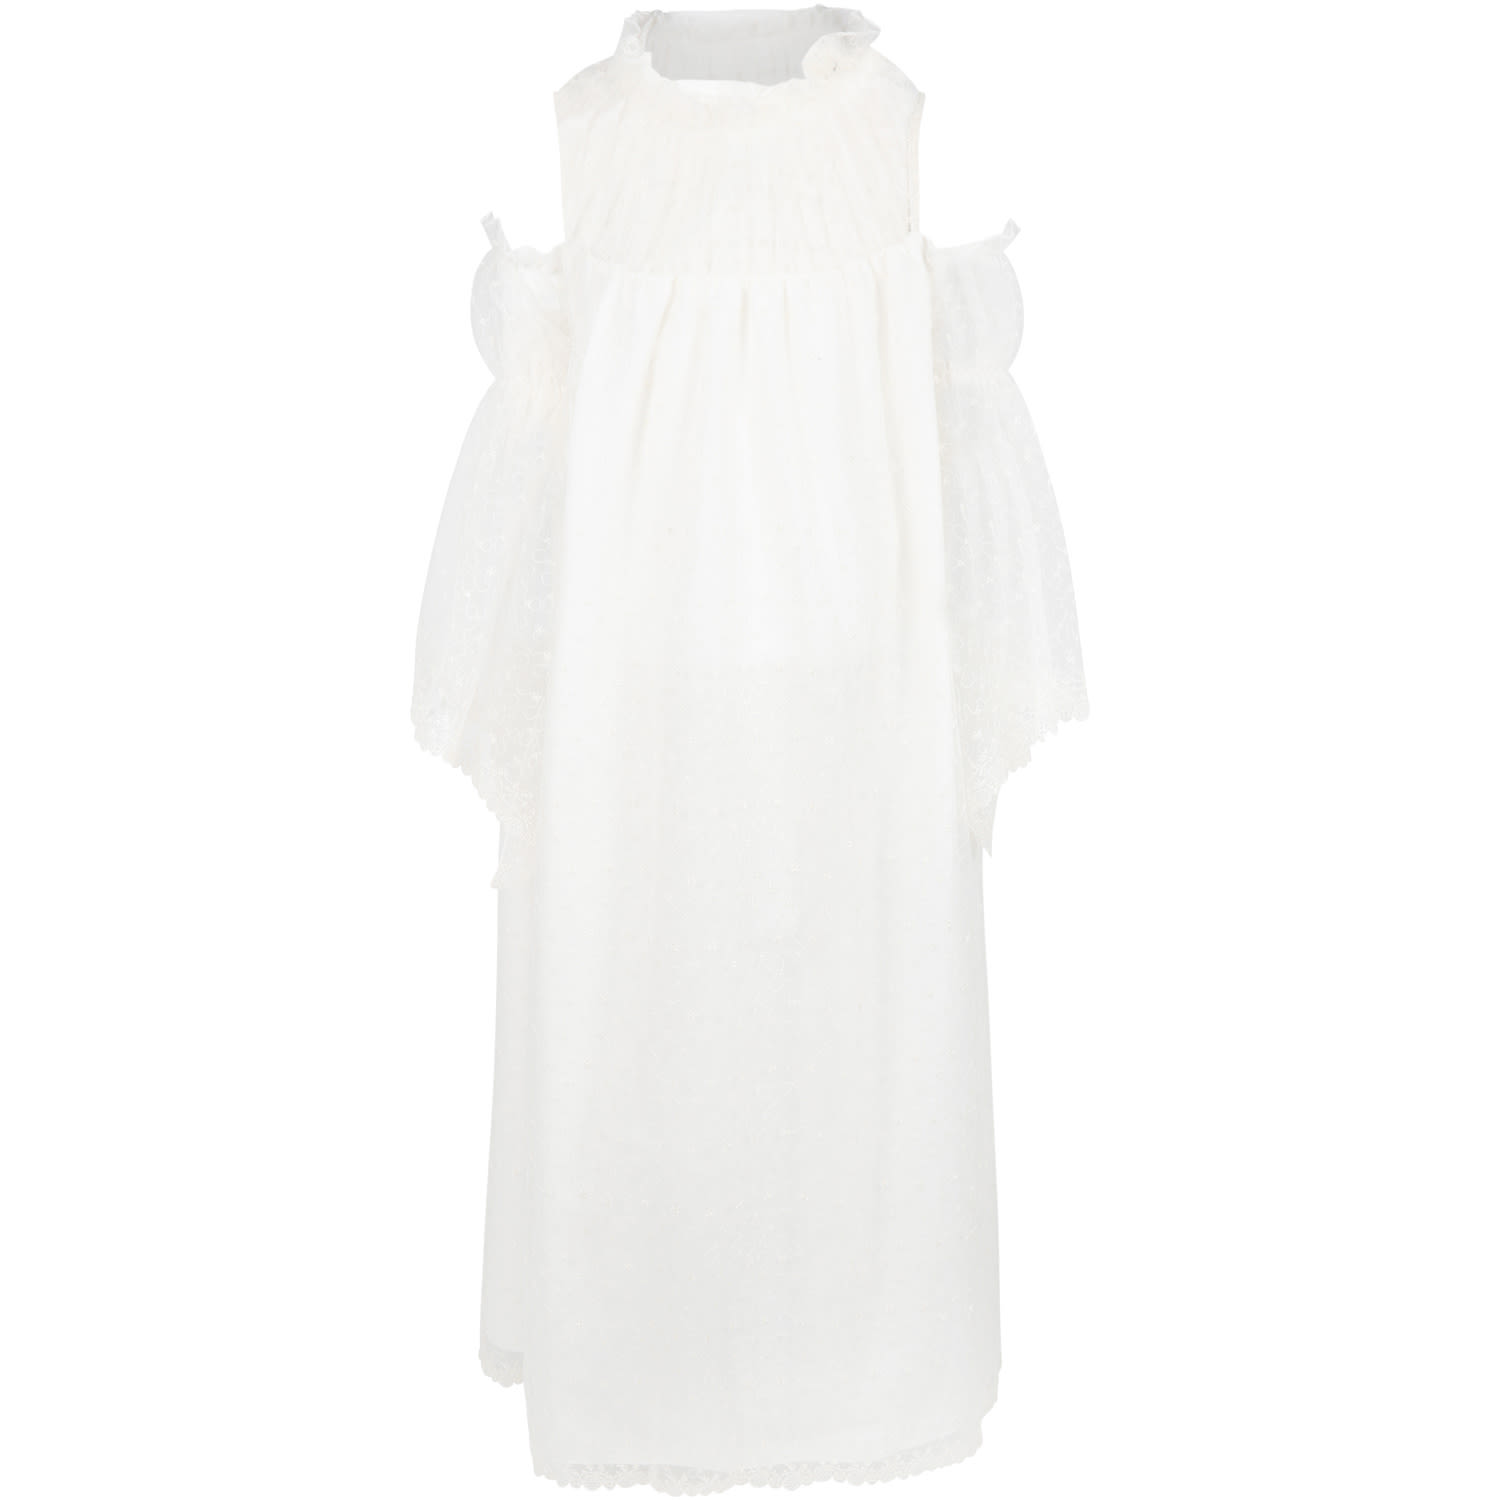 La stupenderia White Dress For Girl With Emroidered Flowers